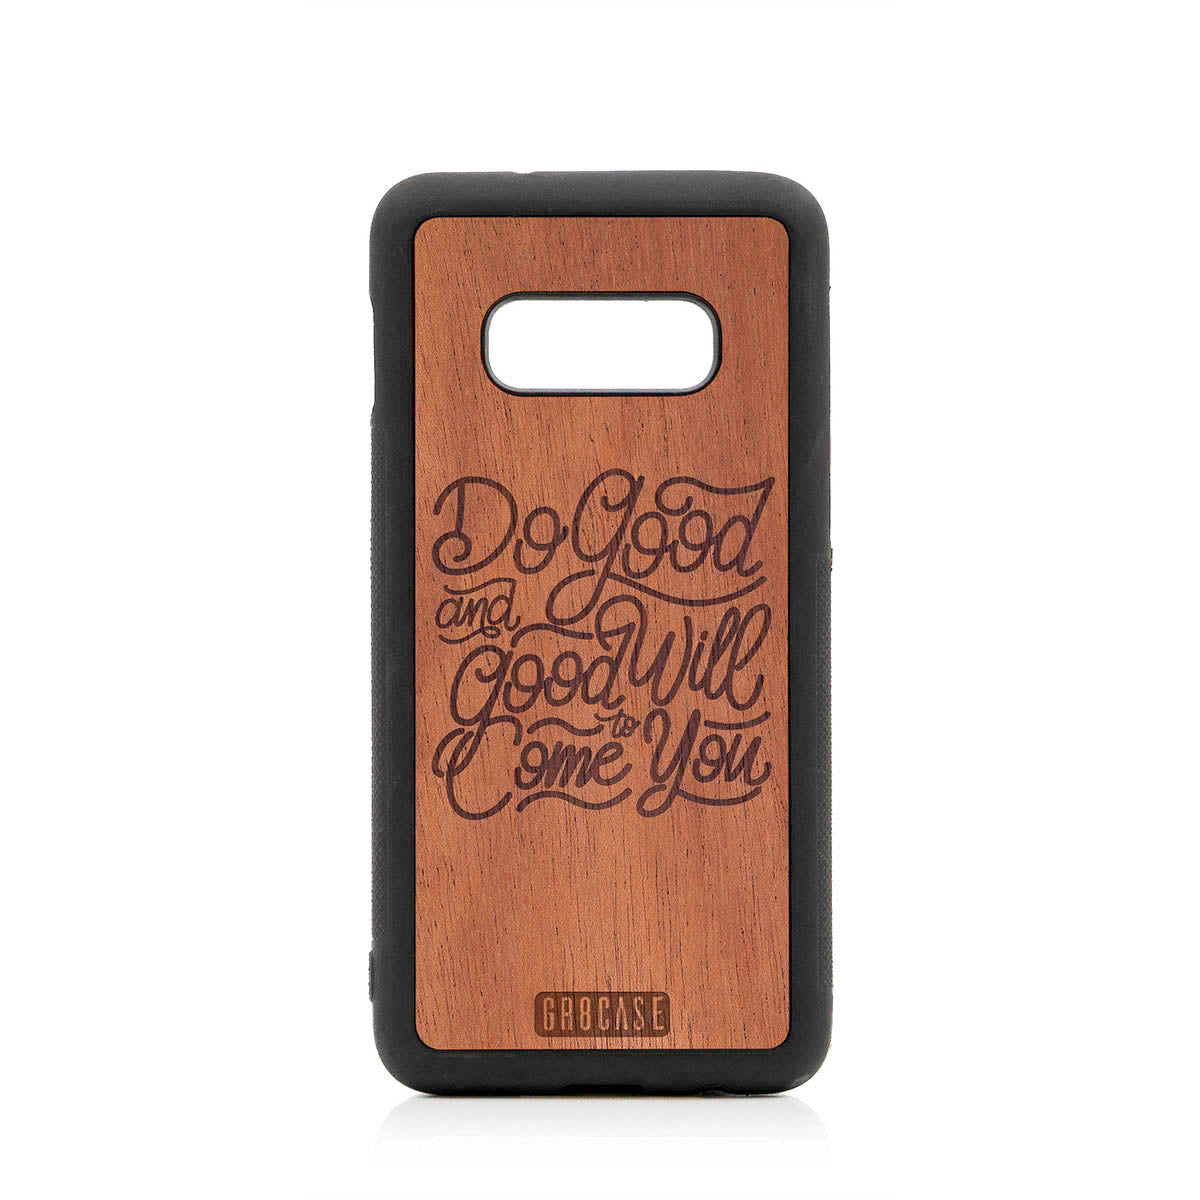 Do Good And Good Will Come To You Design Wood Case For Samsung Galaxy S10E by GR8CASE